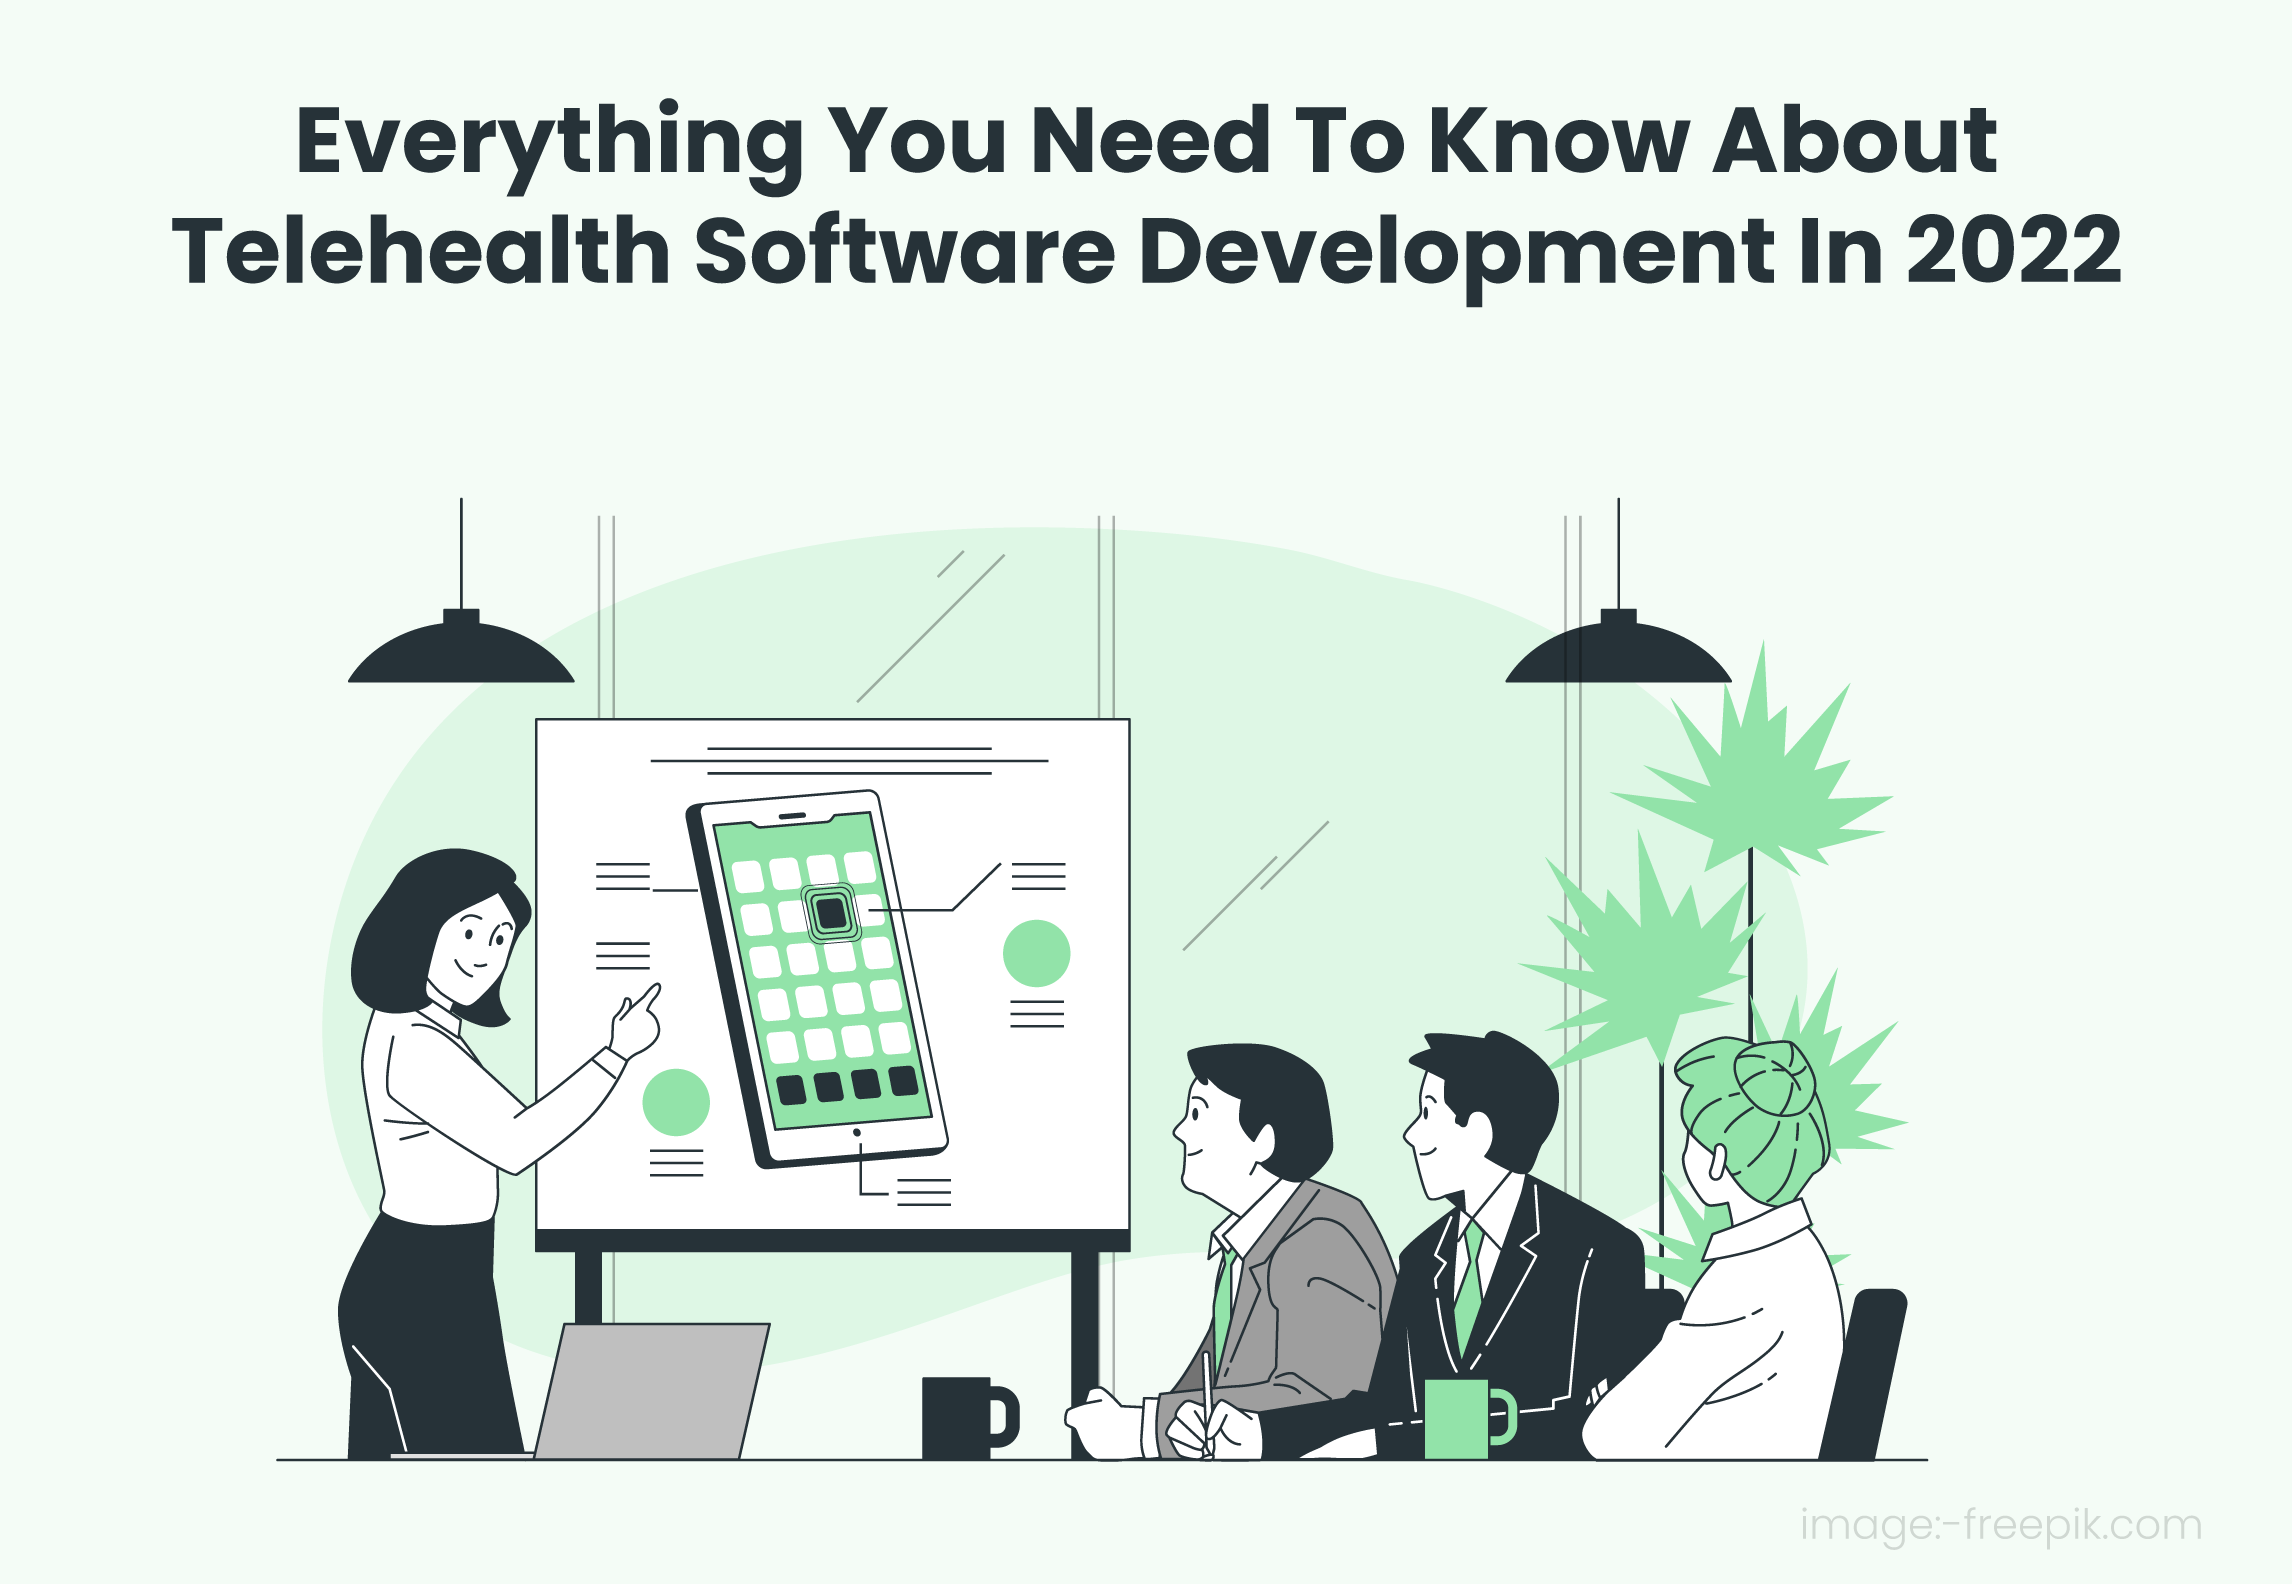 Everything You Need To Know About Telehealth Software Development In 2022 - Knovator